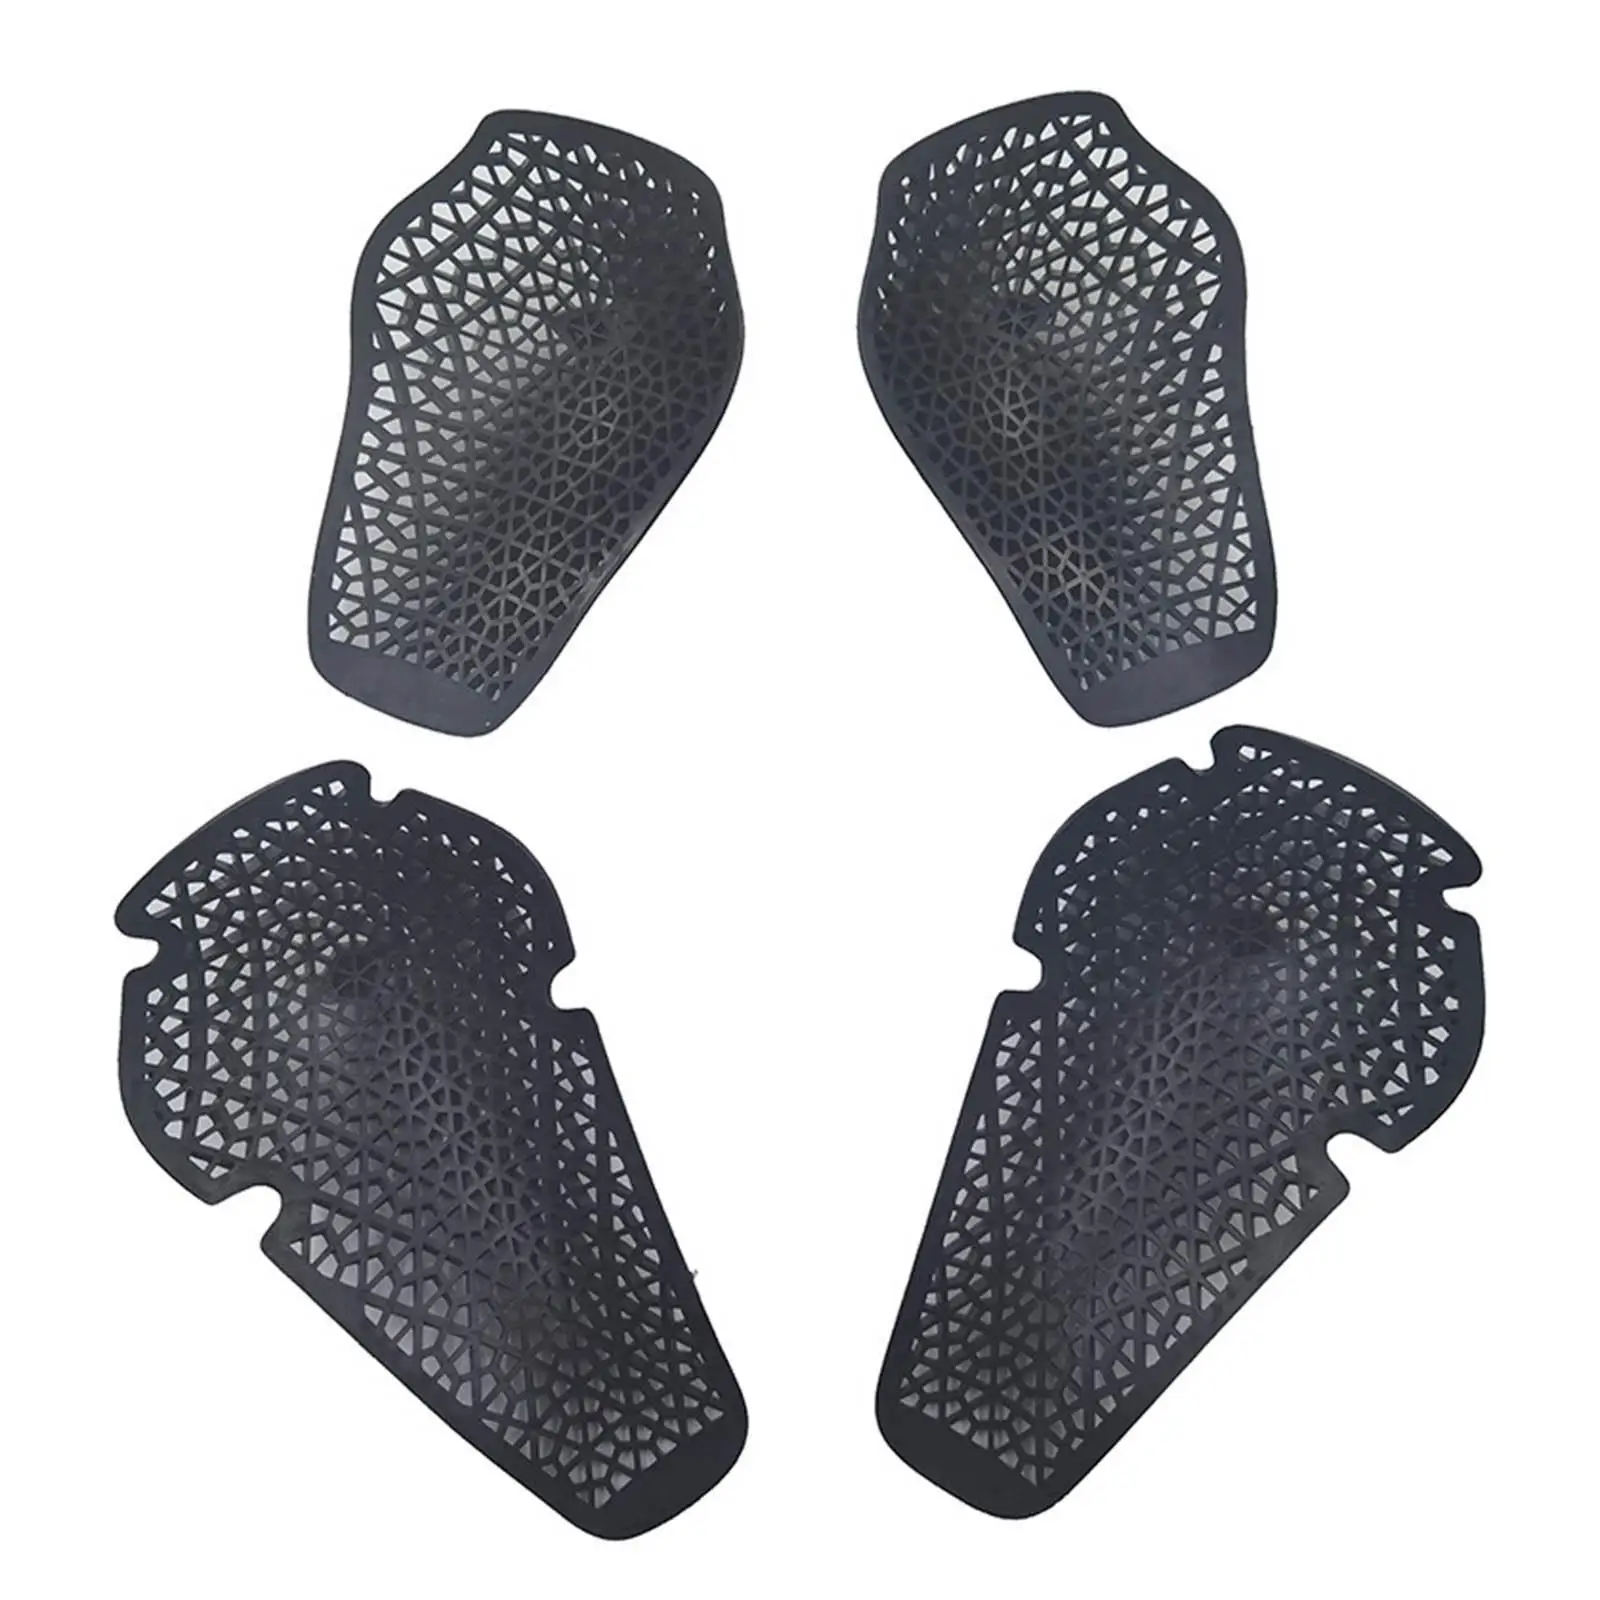 5Pcs Soft TPE Motorcycle Clothing Protective Armor Removable Jacket Inserts for Riding Skating Cycling Protection Inserts